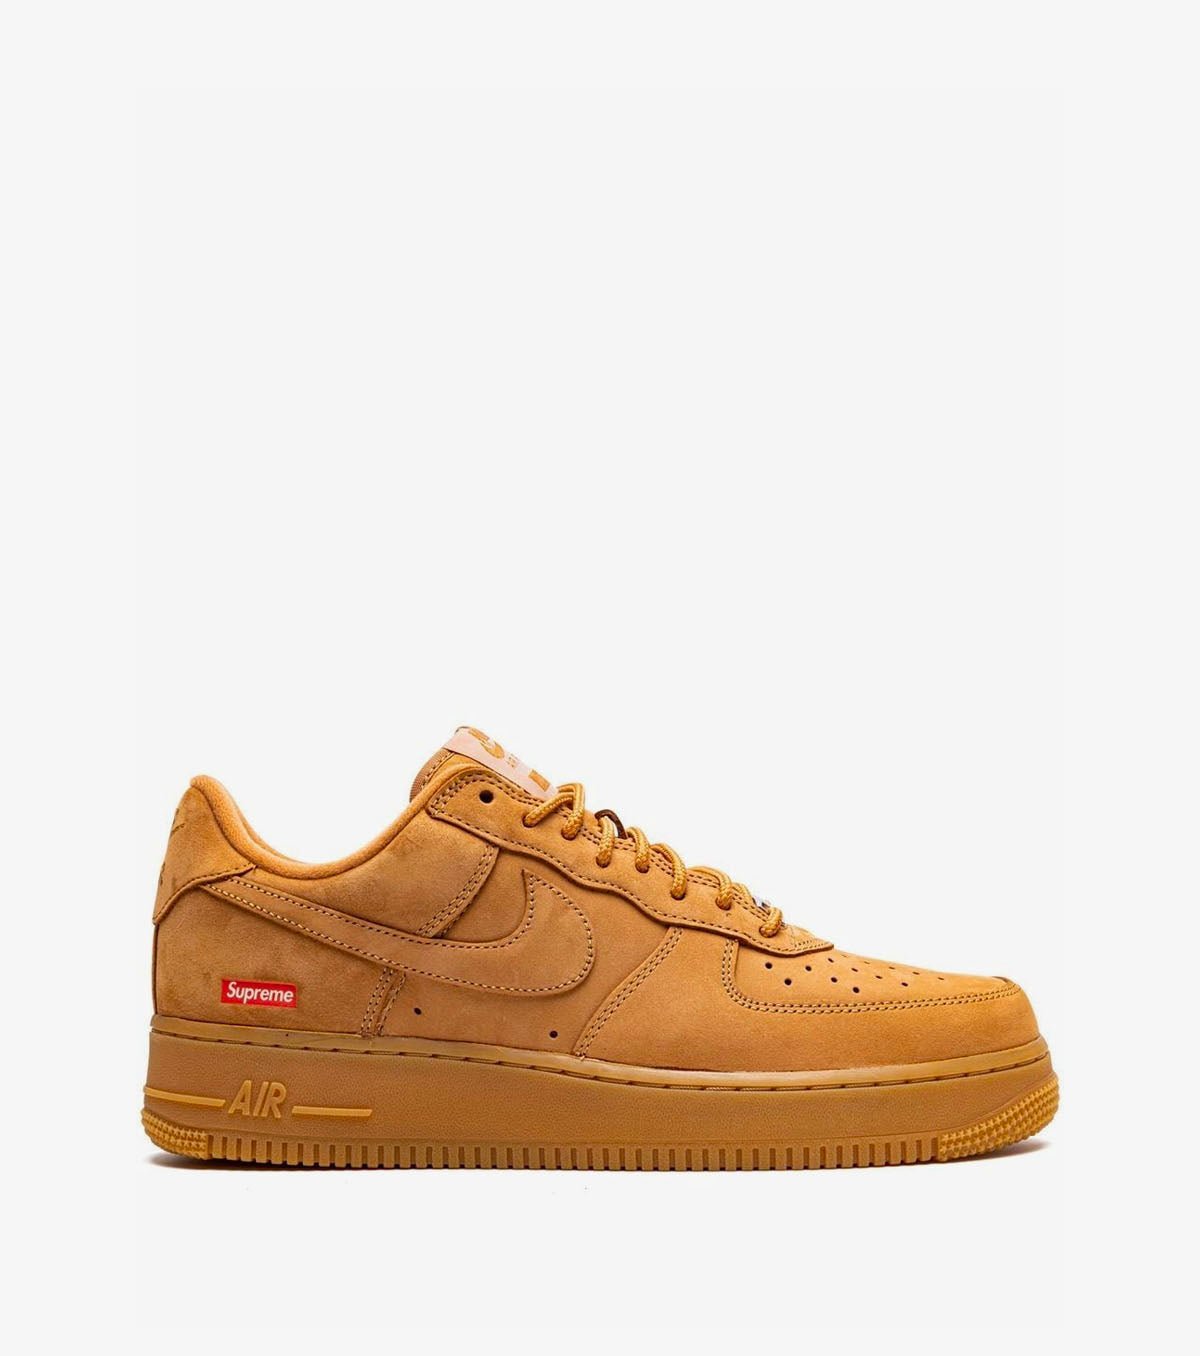 Air Force 1 low top - SNKRBASE